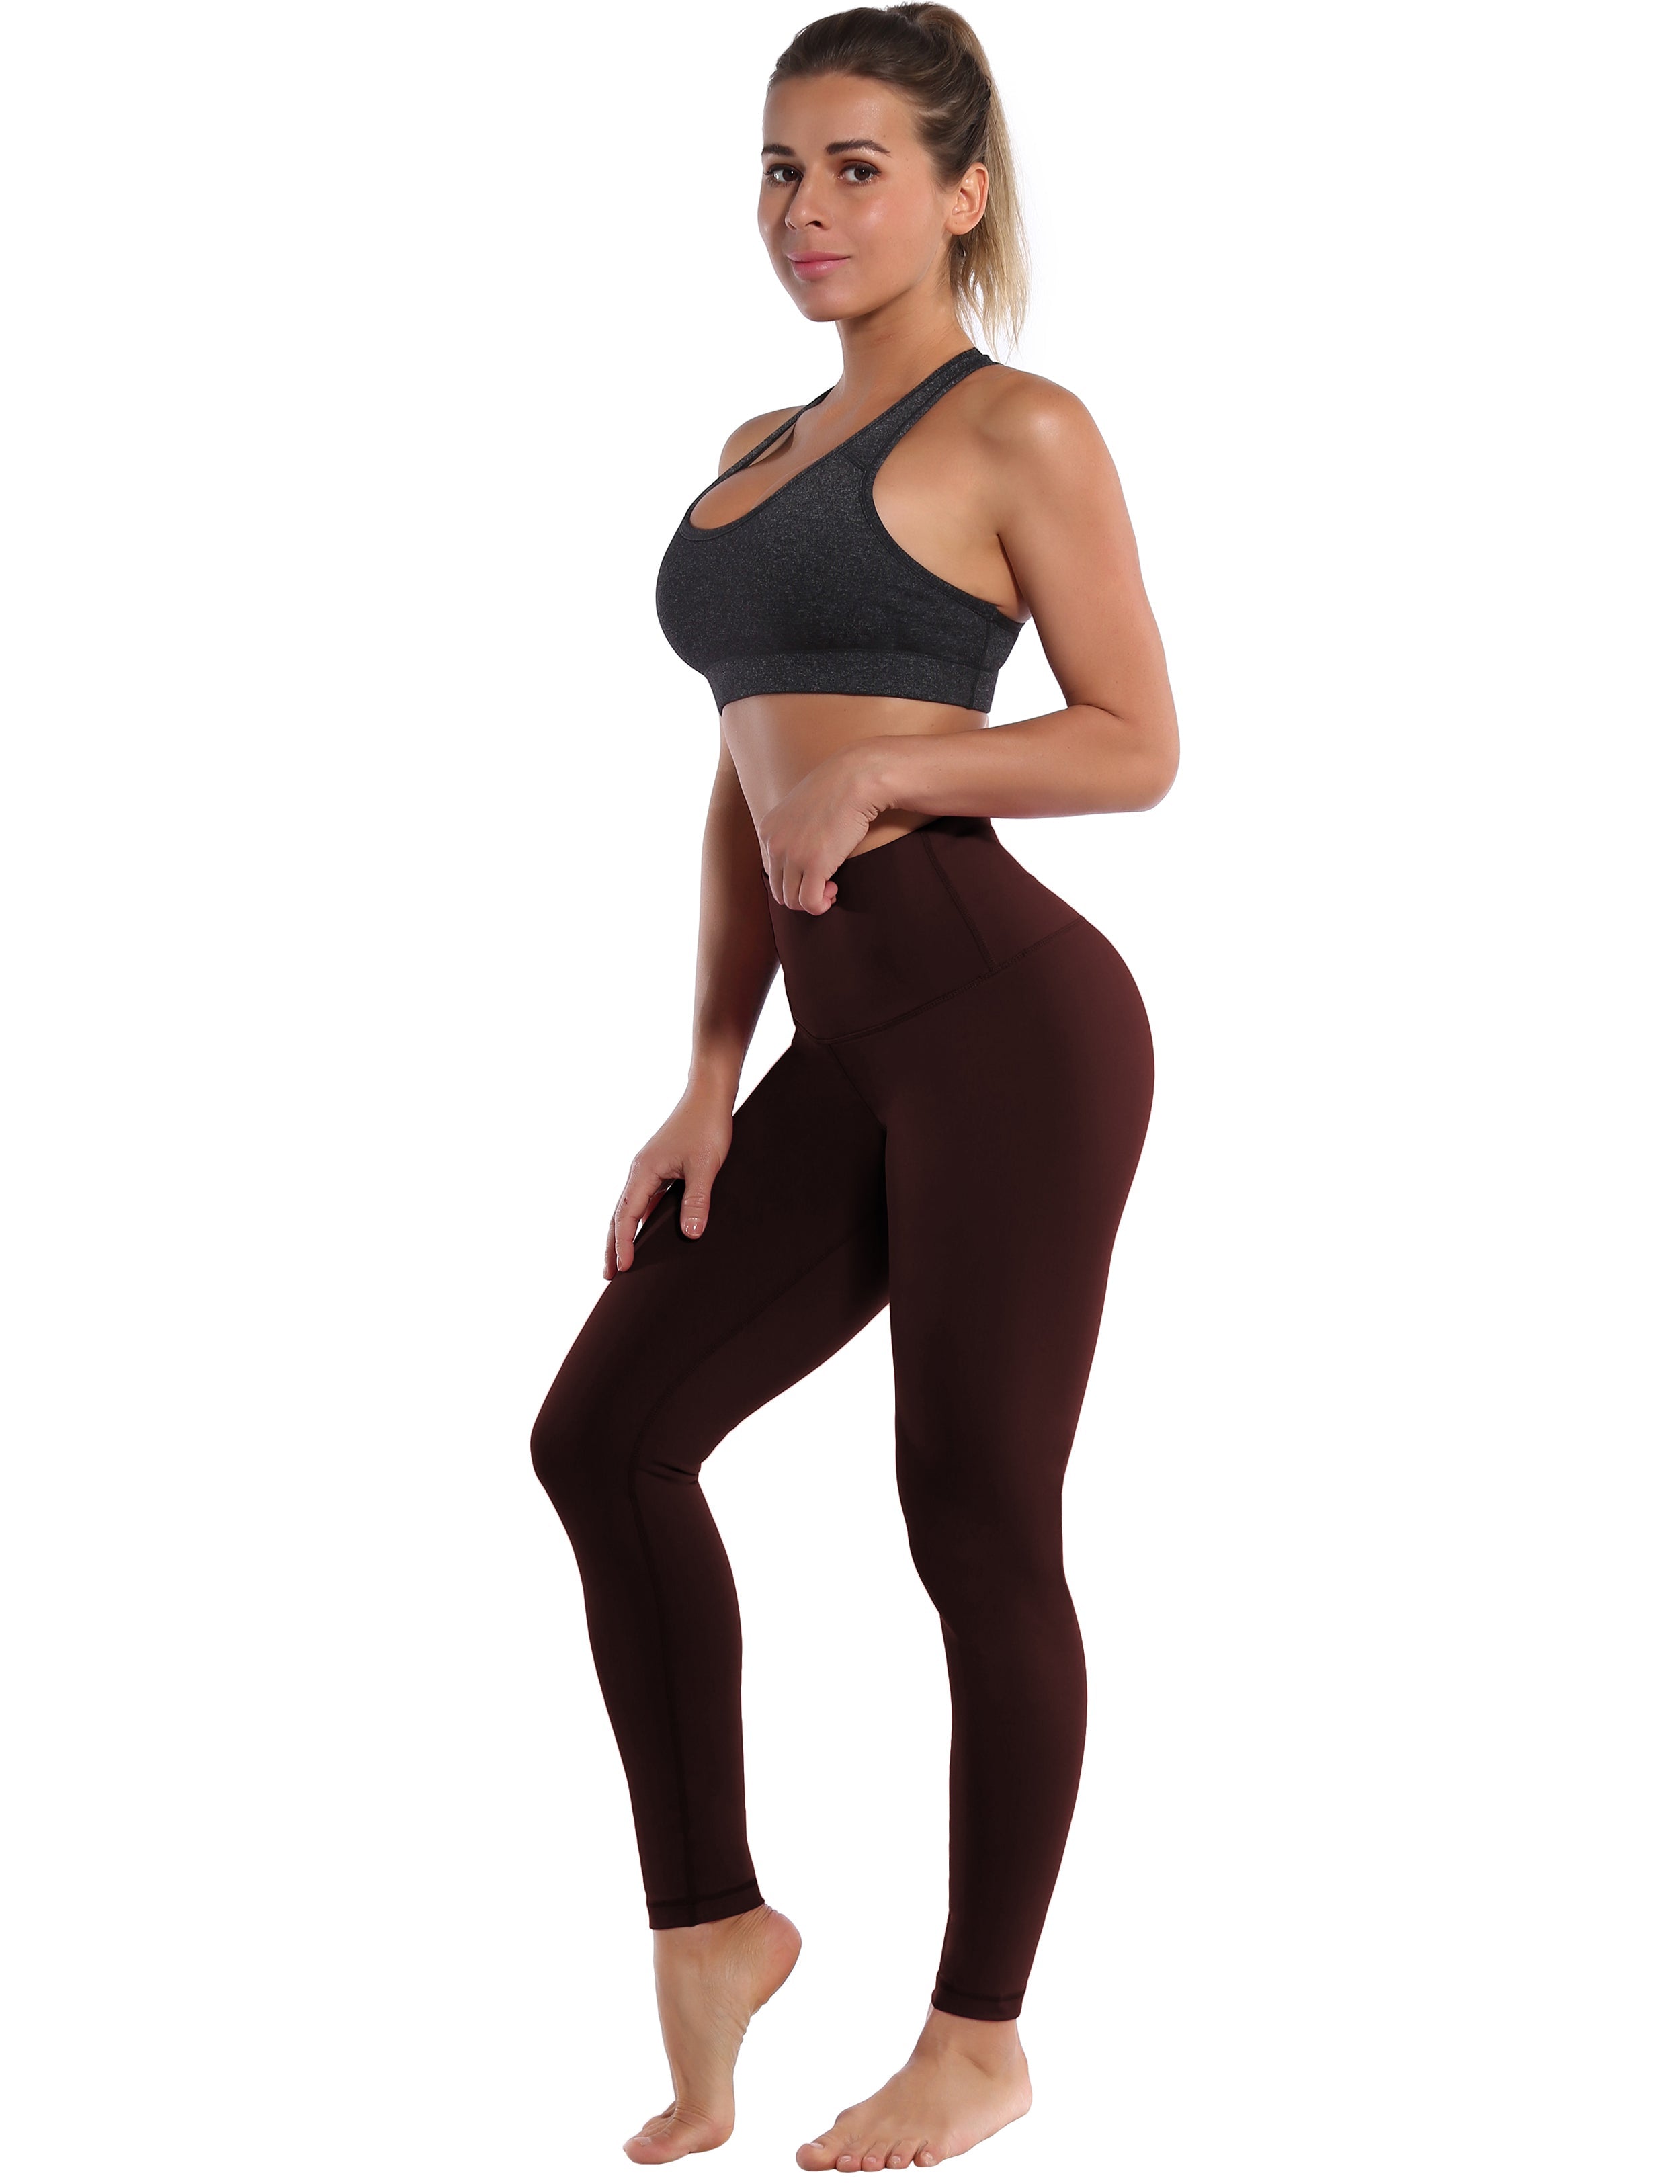 High Waist Pilates Pants mahoganymaroon 75%Nylon/25%Spandex Fabric doesn't attract lint easily 4-way stretch No see-through Moisture-wicking Tummy control Inner pocket Four lengths